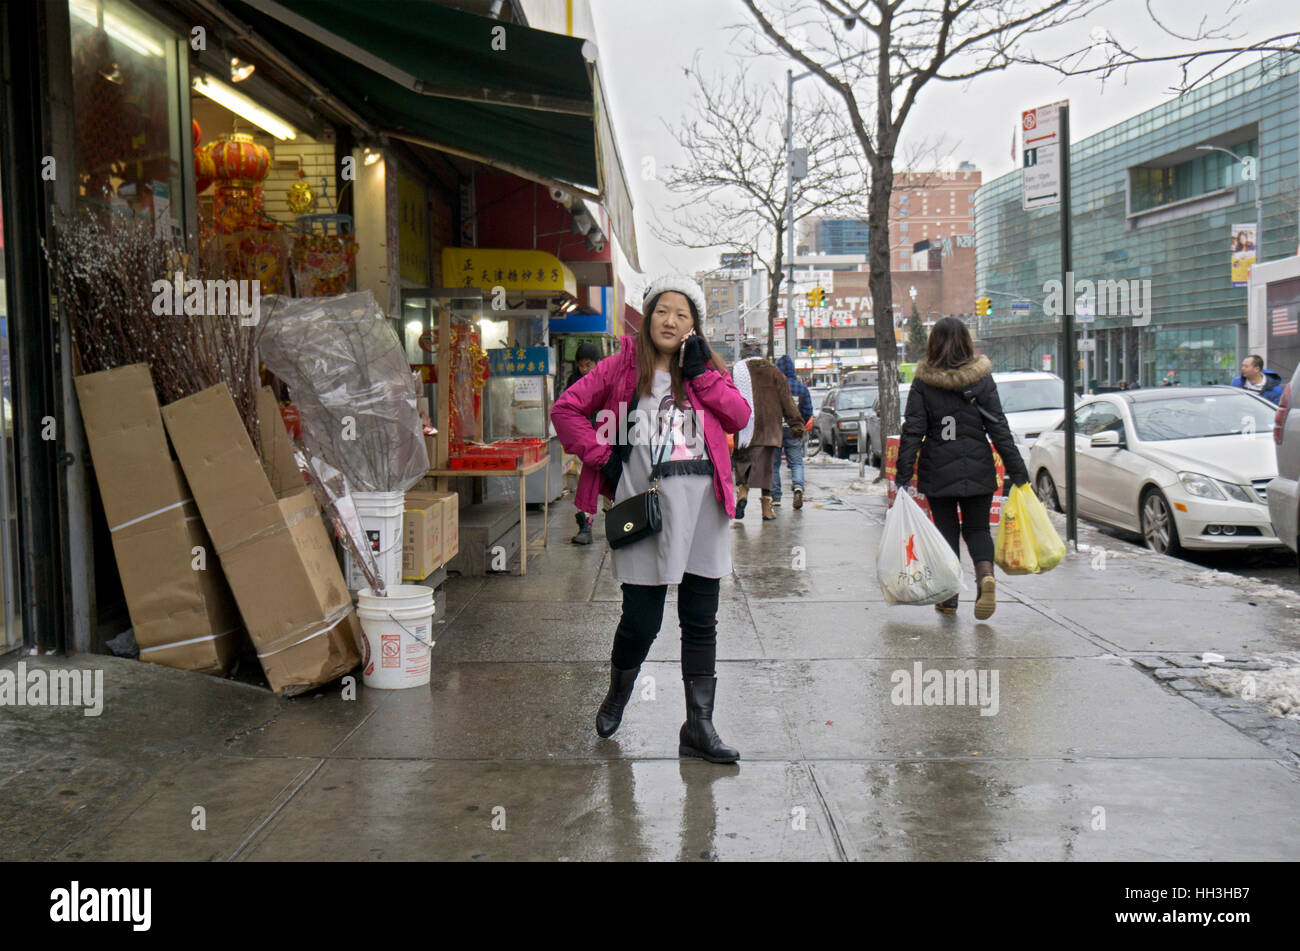 A pregnant woman talking on her cell phone on an overcast winter day. In Chinatown, downtown Flushing, Queens, New York City. Stock Photo